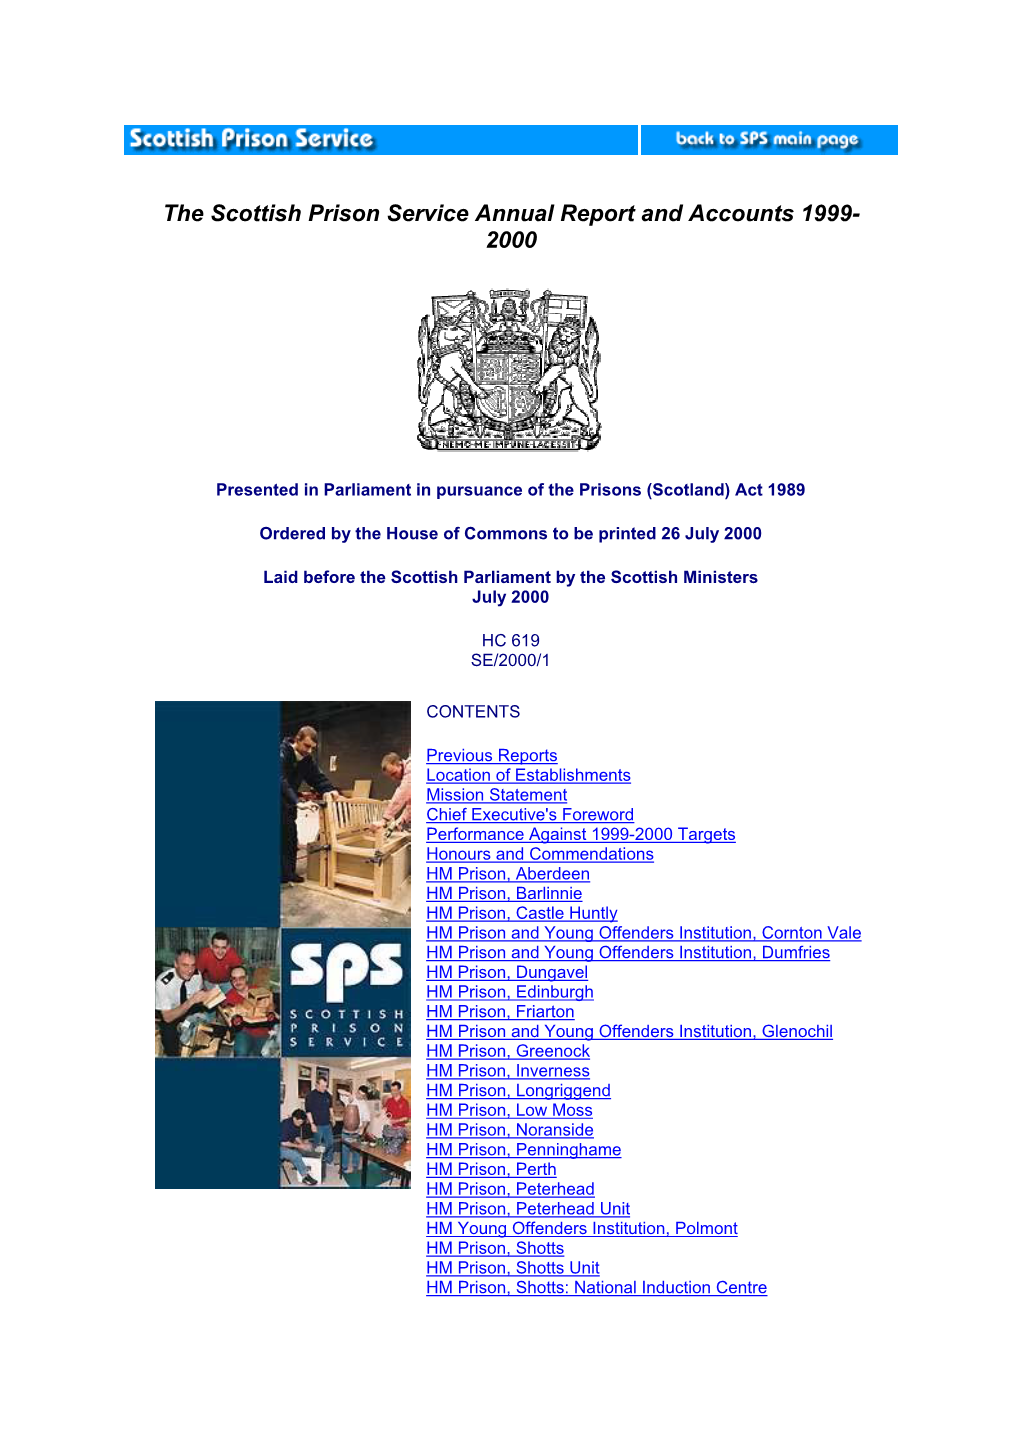 The SPS Annual Report and Accounts 1999-2000